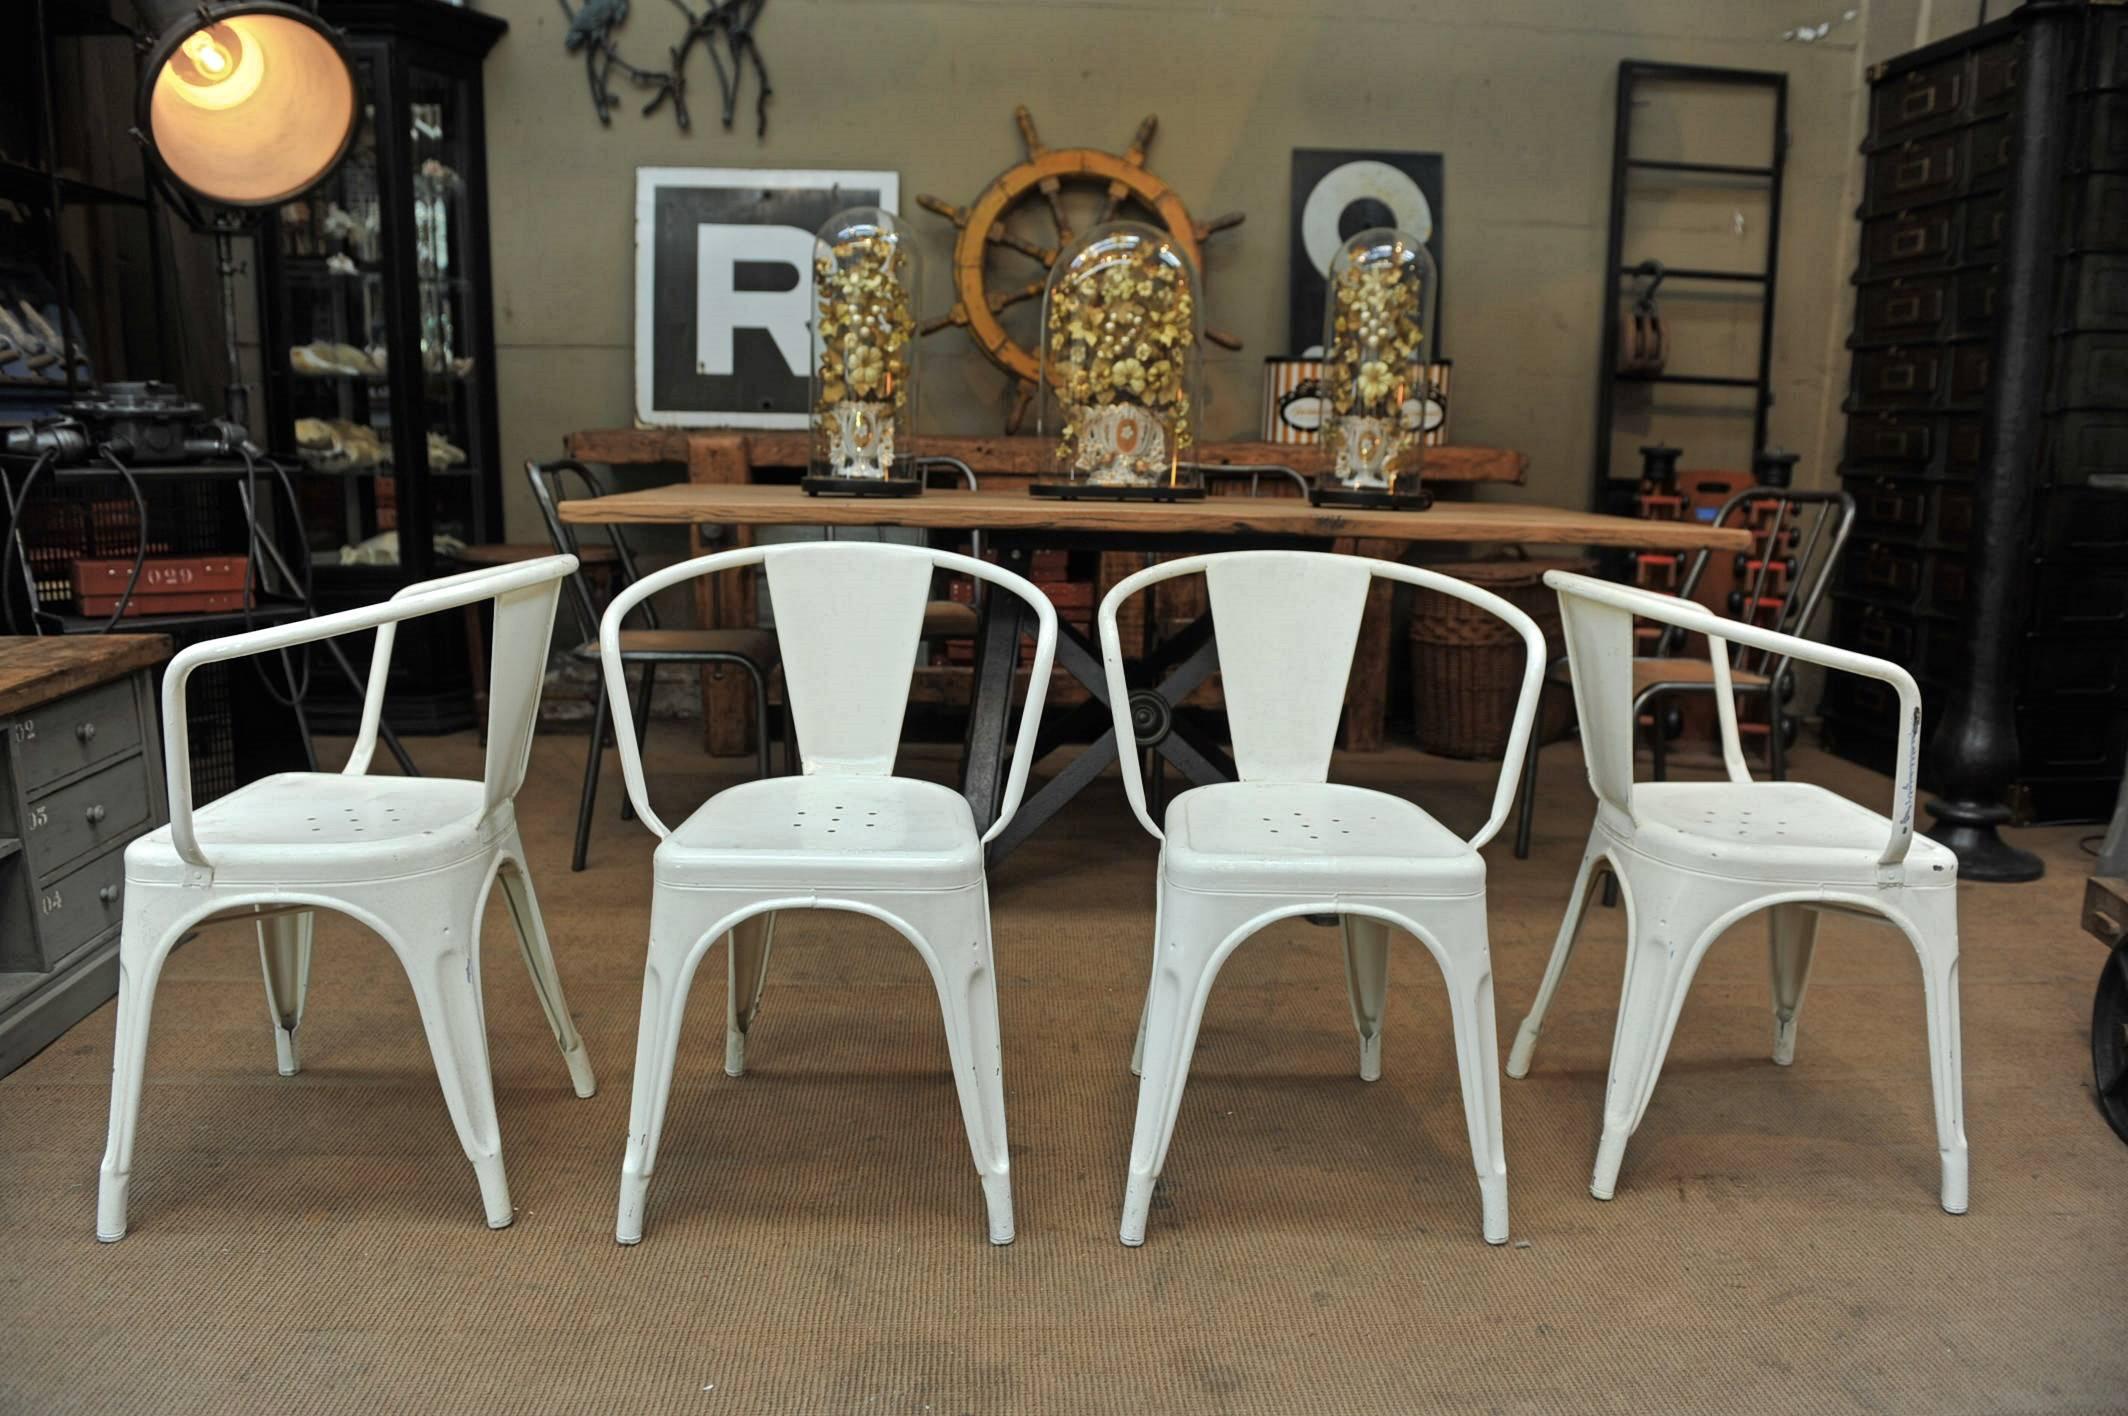 Four iron 1950 metal tolix stackable armchairs, vintage white color (table not included and not available).
     